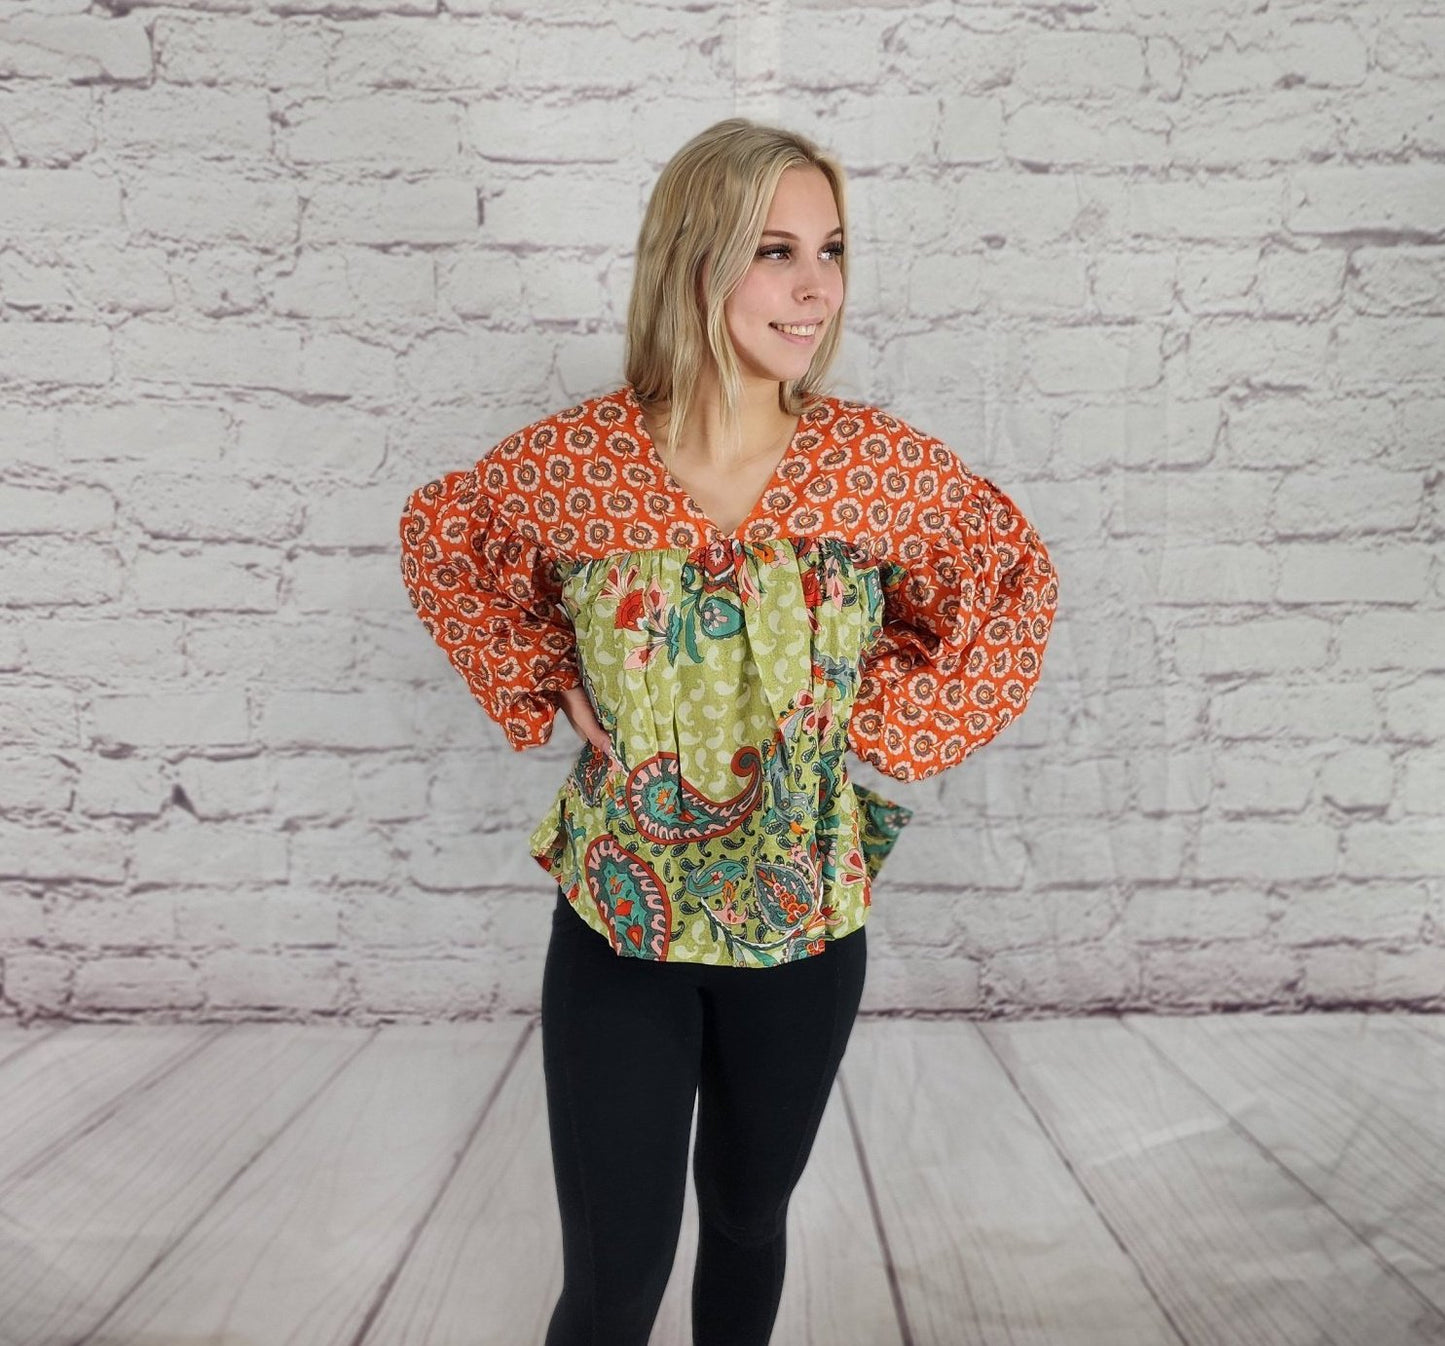 Printed floral and paisley pattern V-Neck top  Ivy and Pearl Boutique   